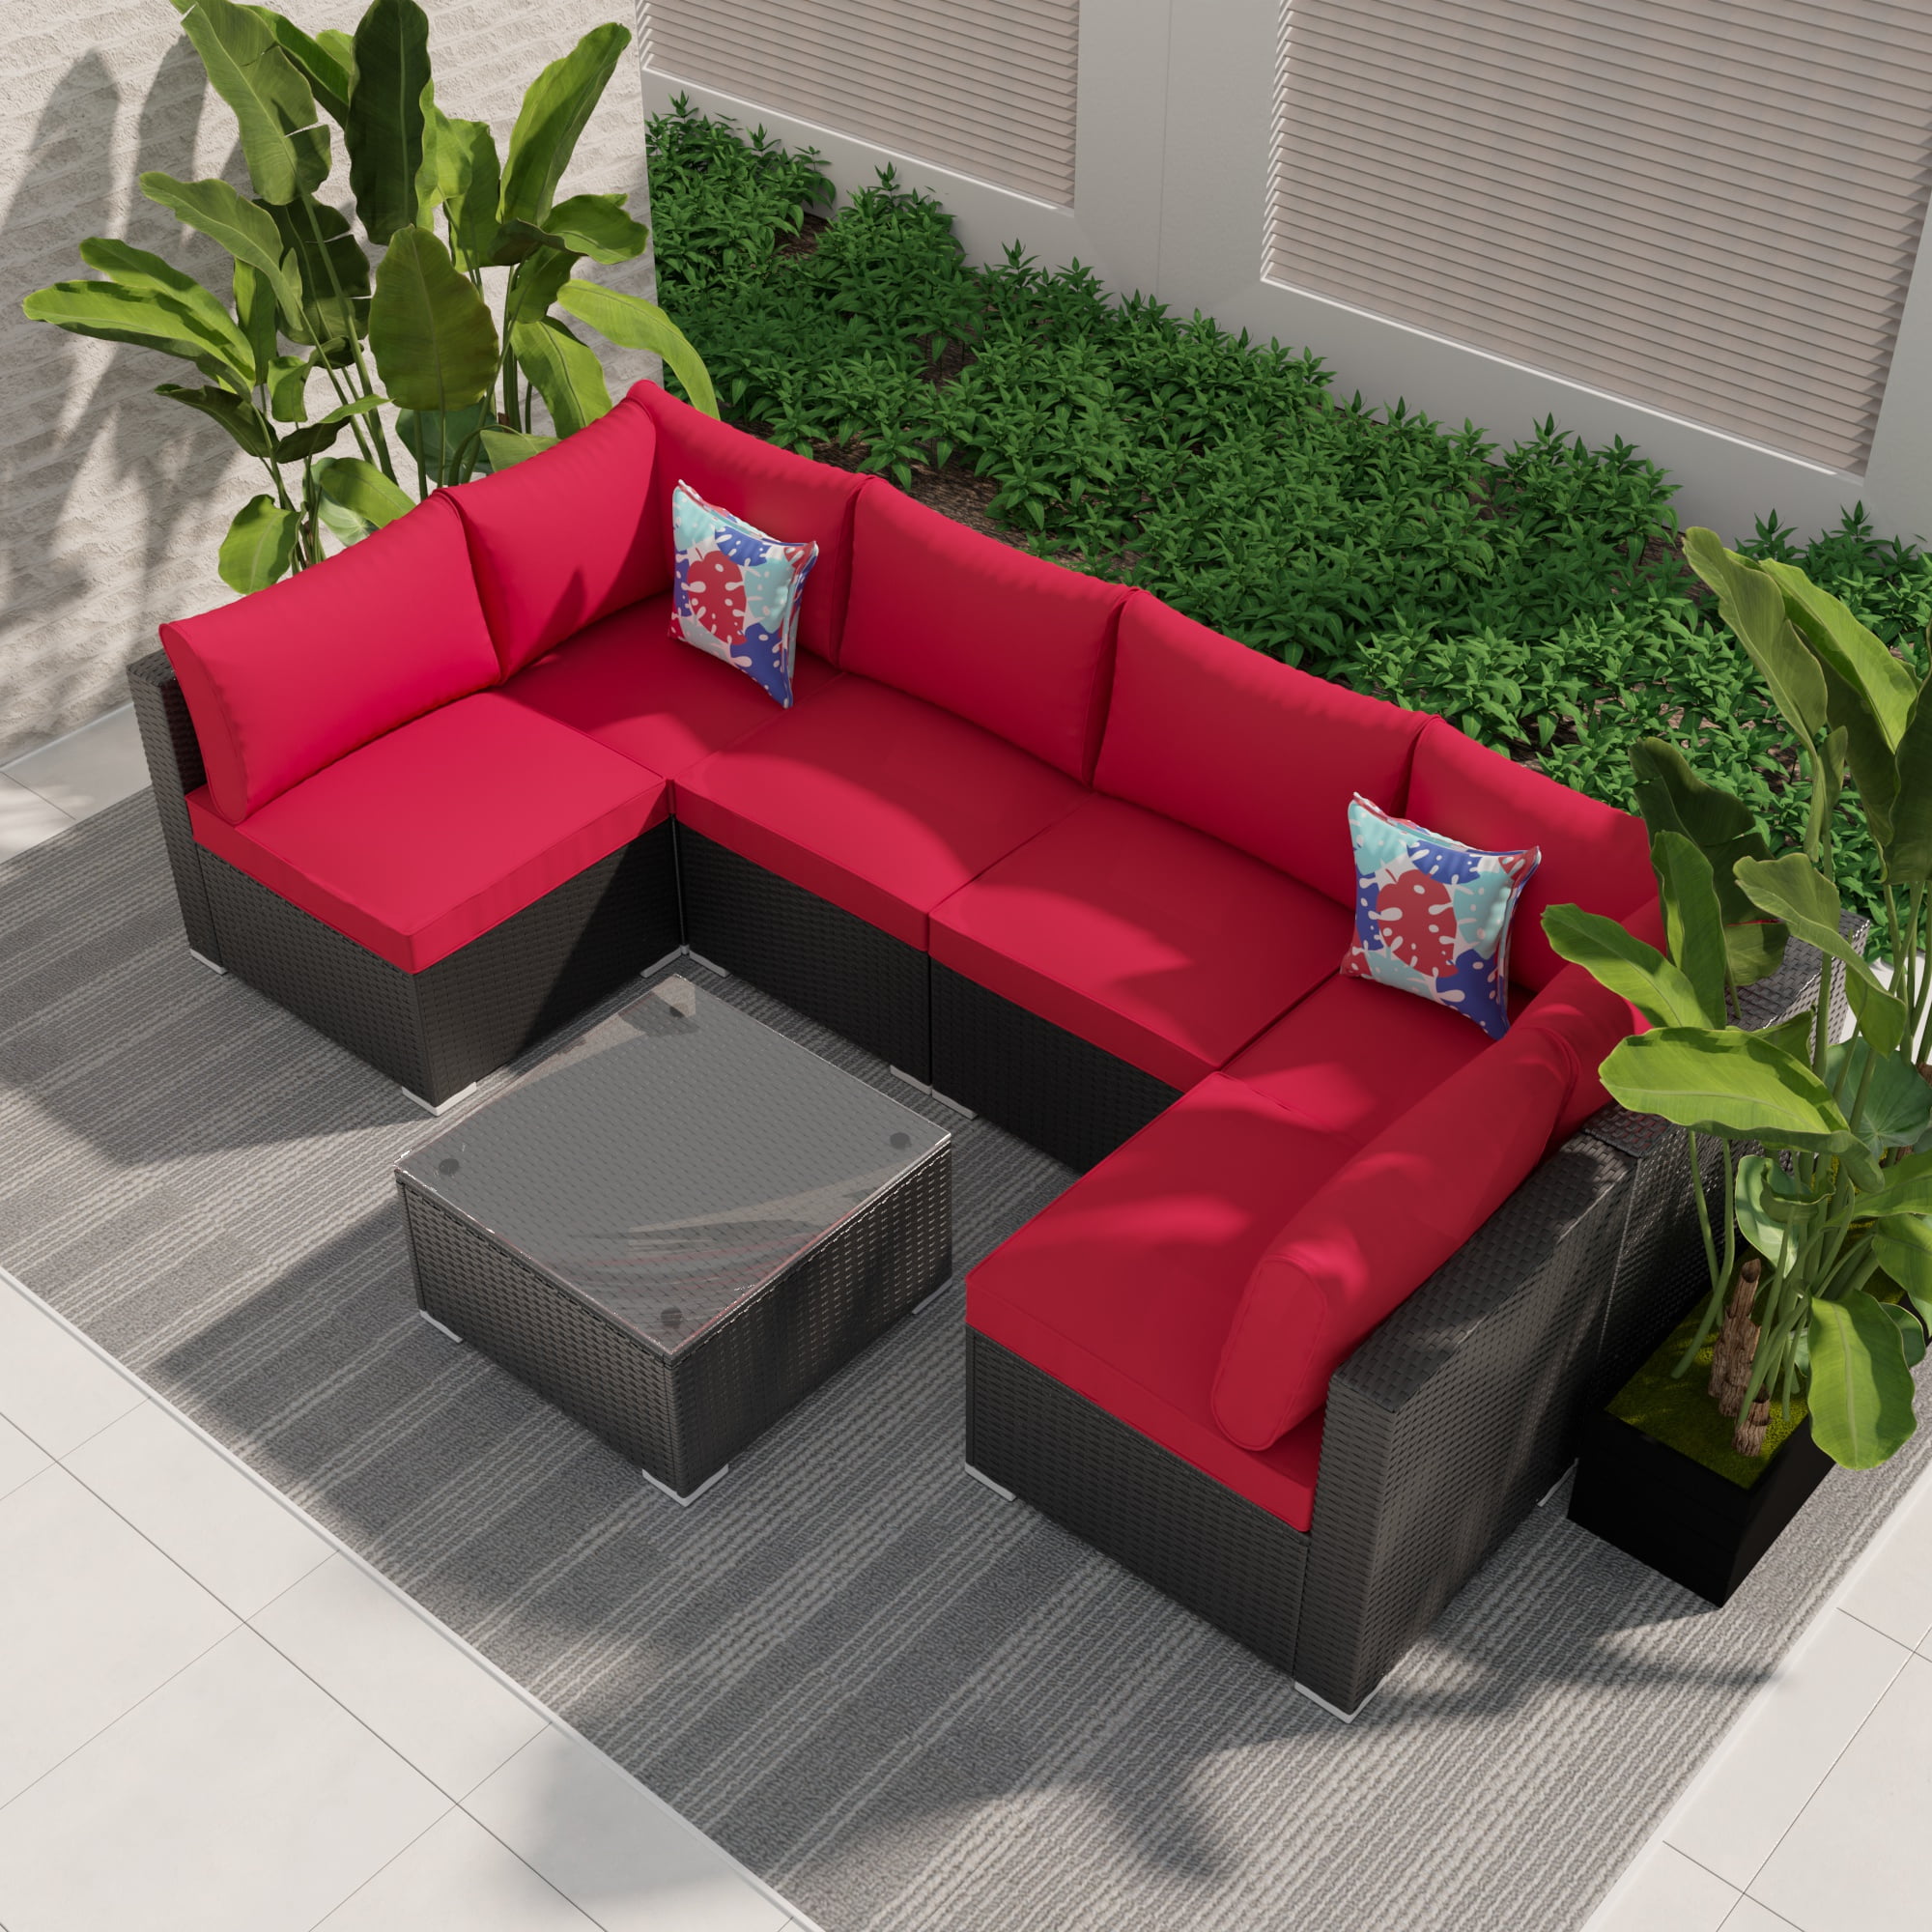 Ainfox 7 PC Outdoor Patio Furniture Sofa Set (Red) $479.99 + Free Shipping